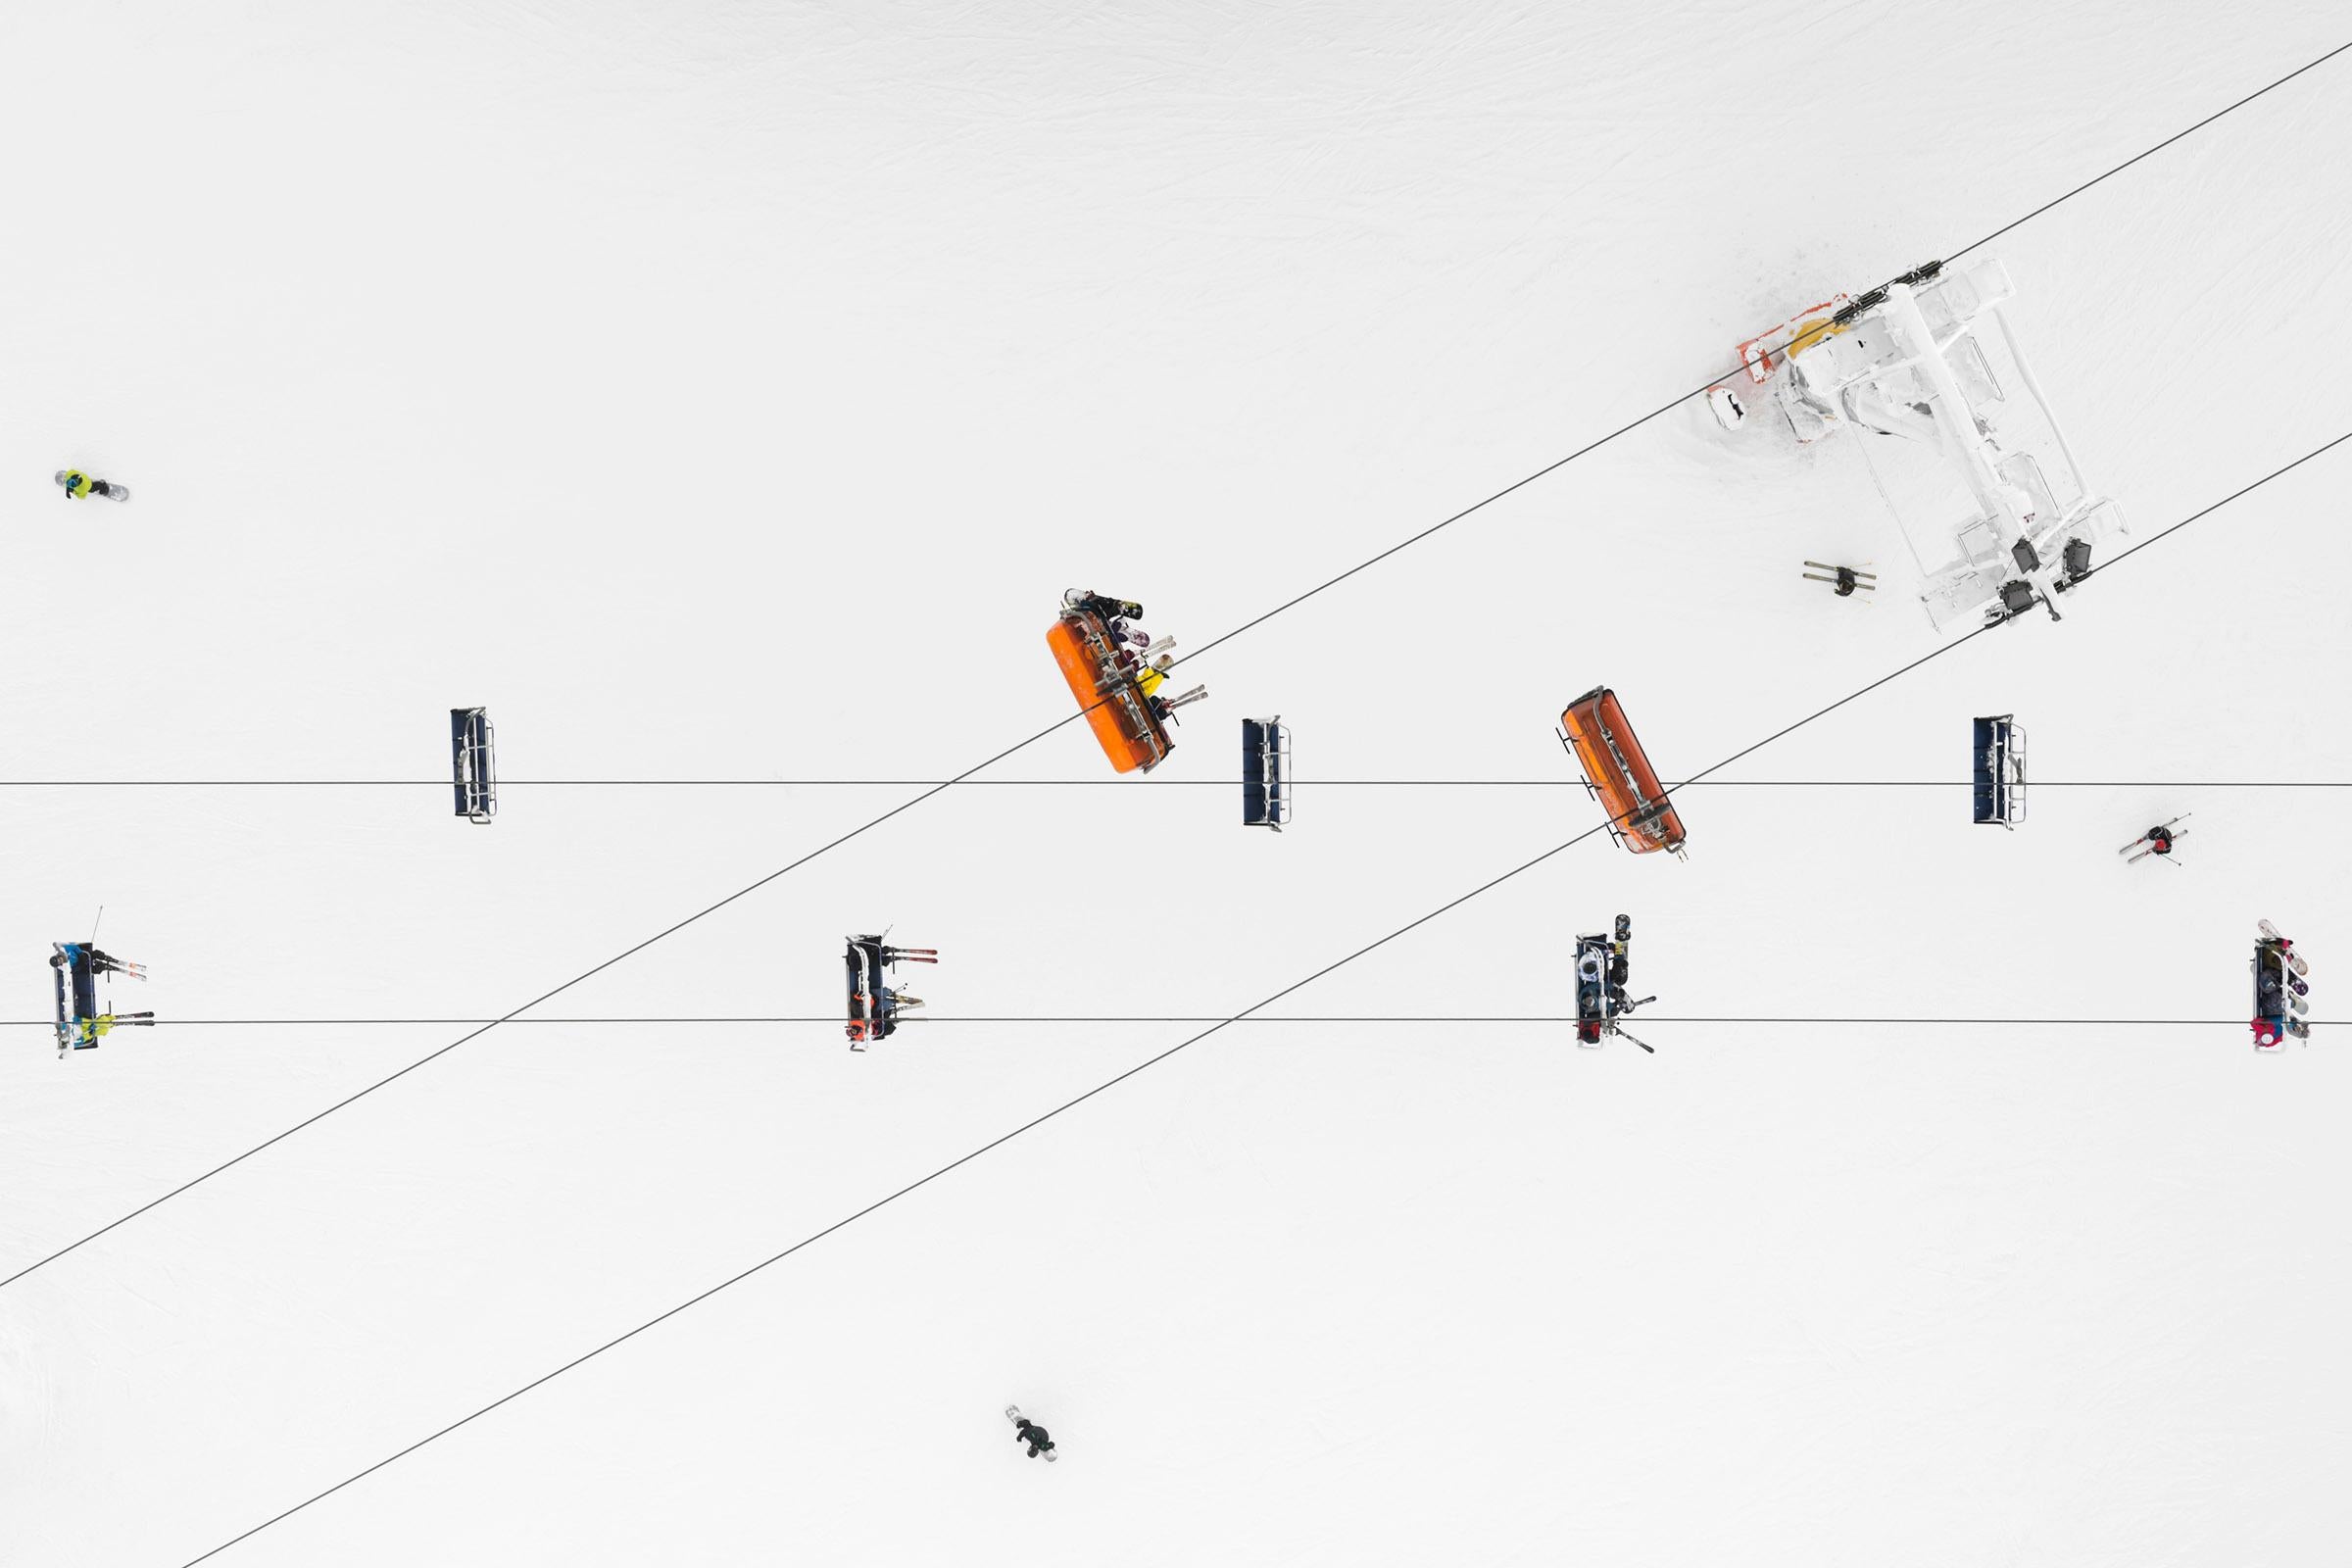 Kacper Kowalski Abstract Photograph - Side Effects, Depth of Winter, Skiers 01, abstract aerial landscape photograph